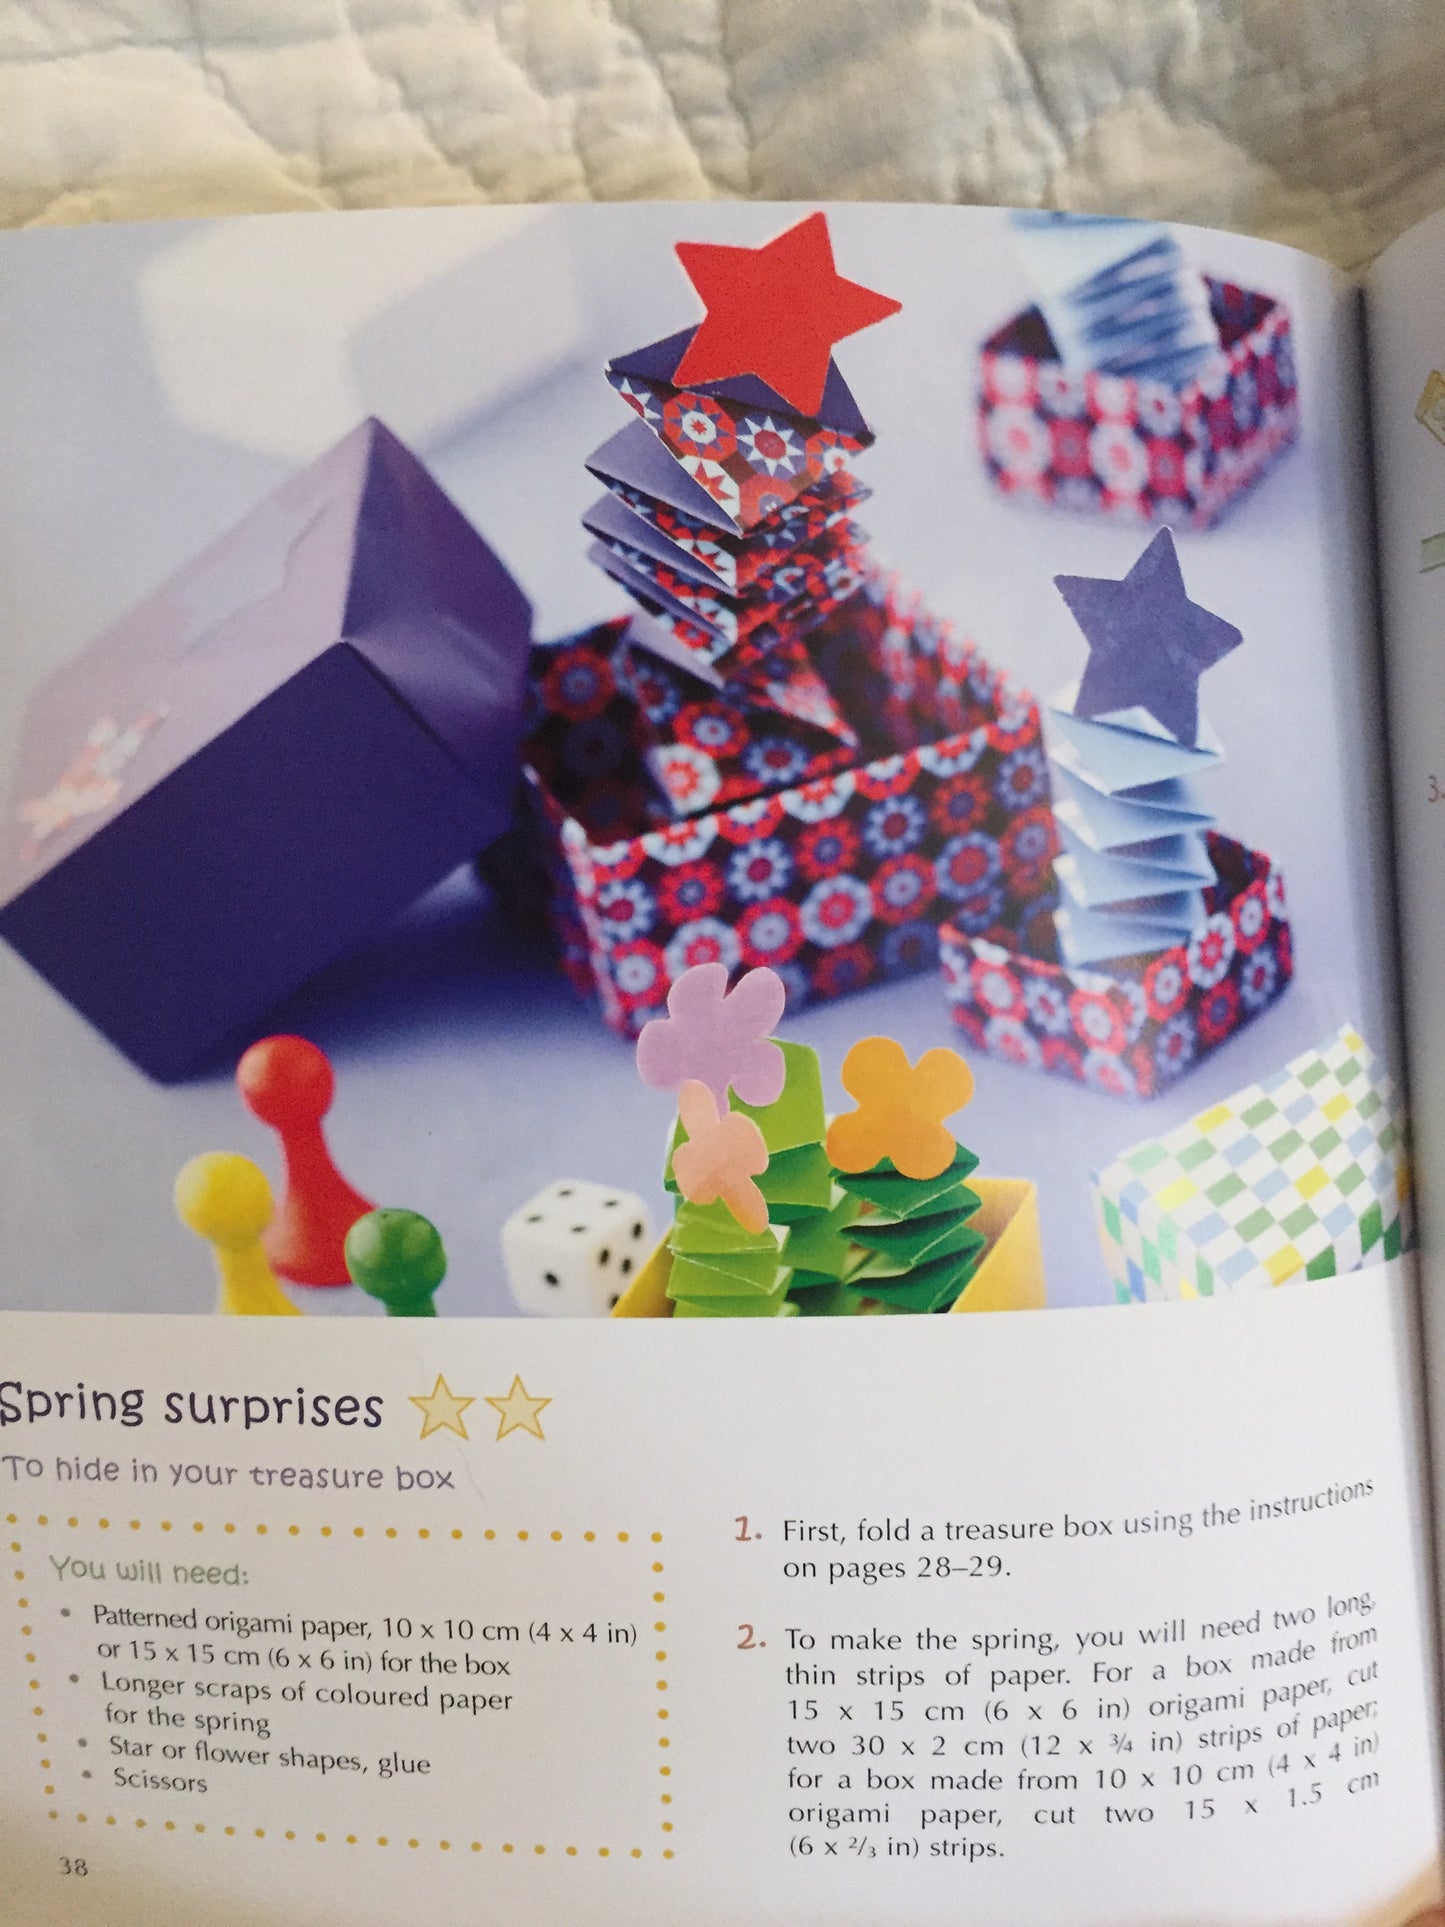 Crafting Resource Book - PAPER FOLDING WITH CHILDREN